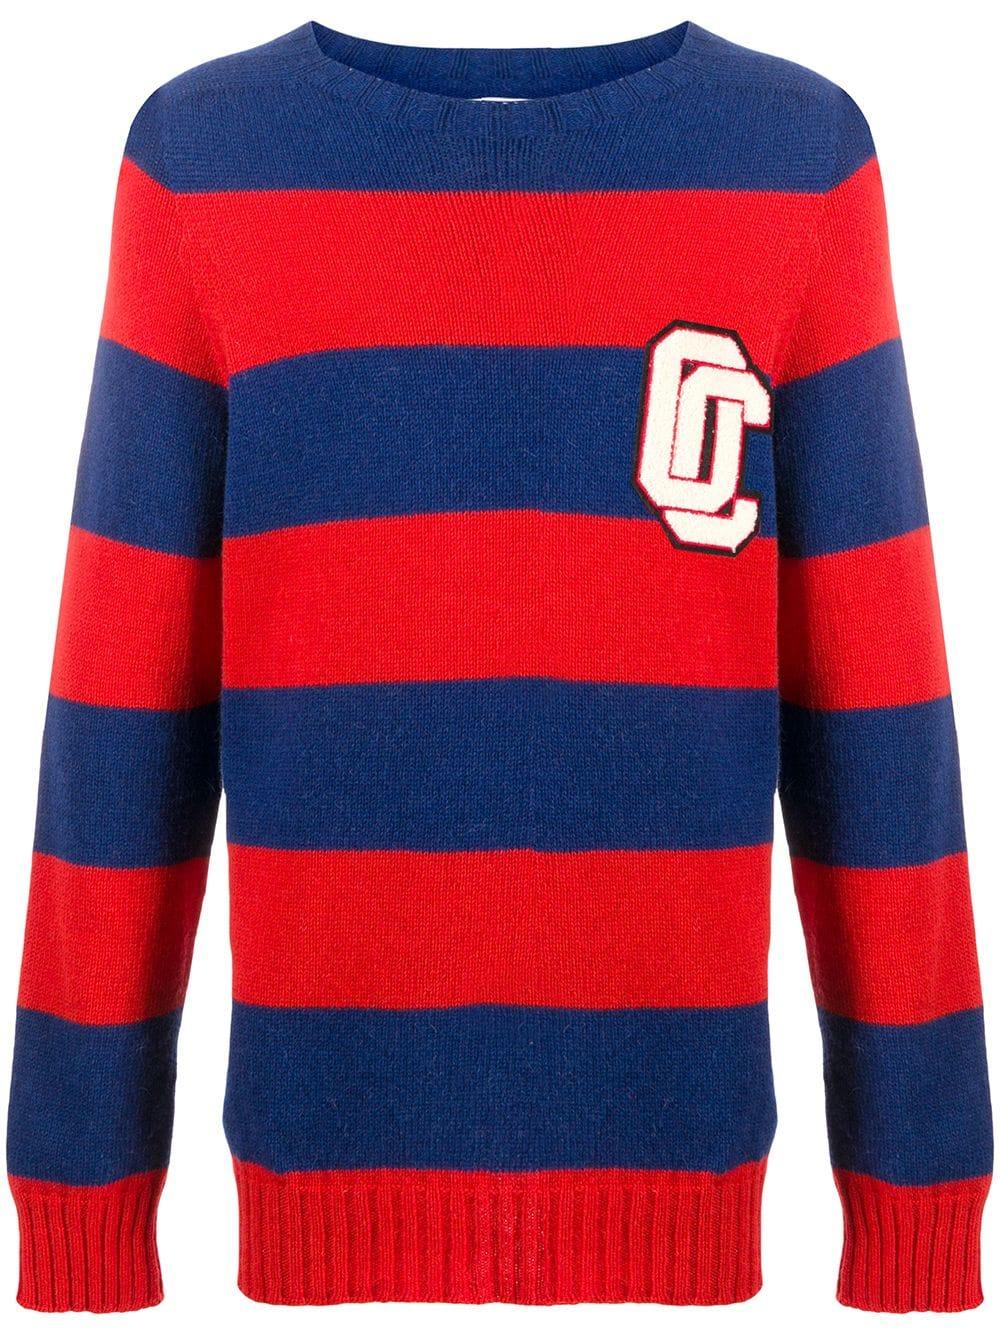 Opening Ceremony Logo Patch Striped Jumper in Red for Men - Lyst